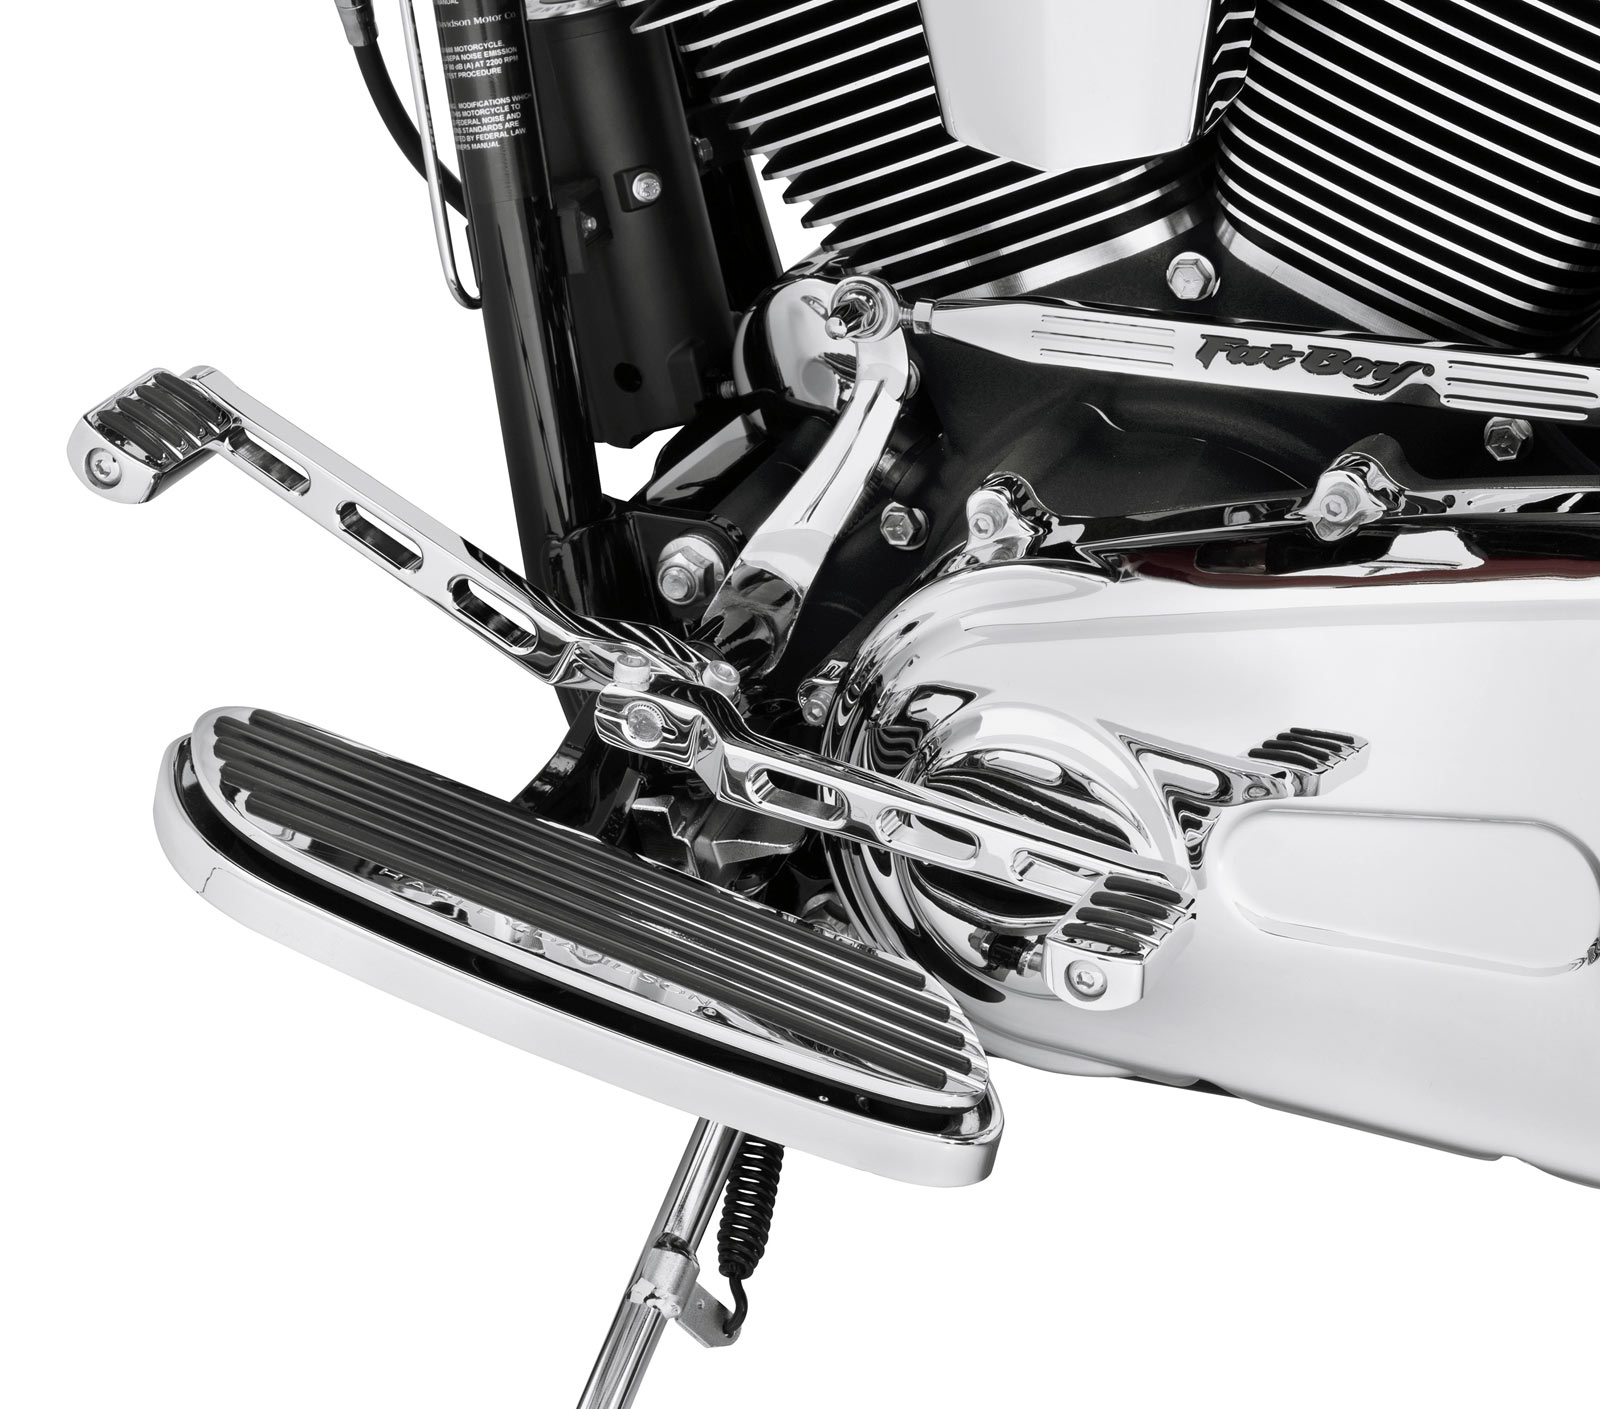 33600001 Billet Style Heel Toe Shift Lever Extended Reach Chrome At Thunderbike Shop